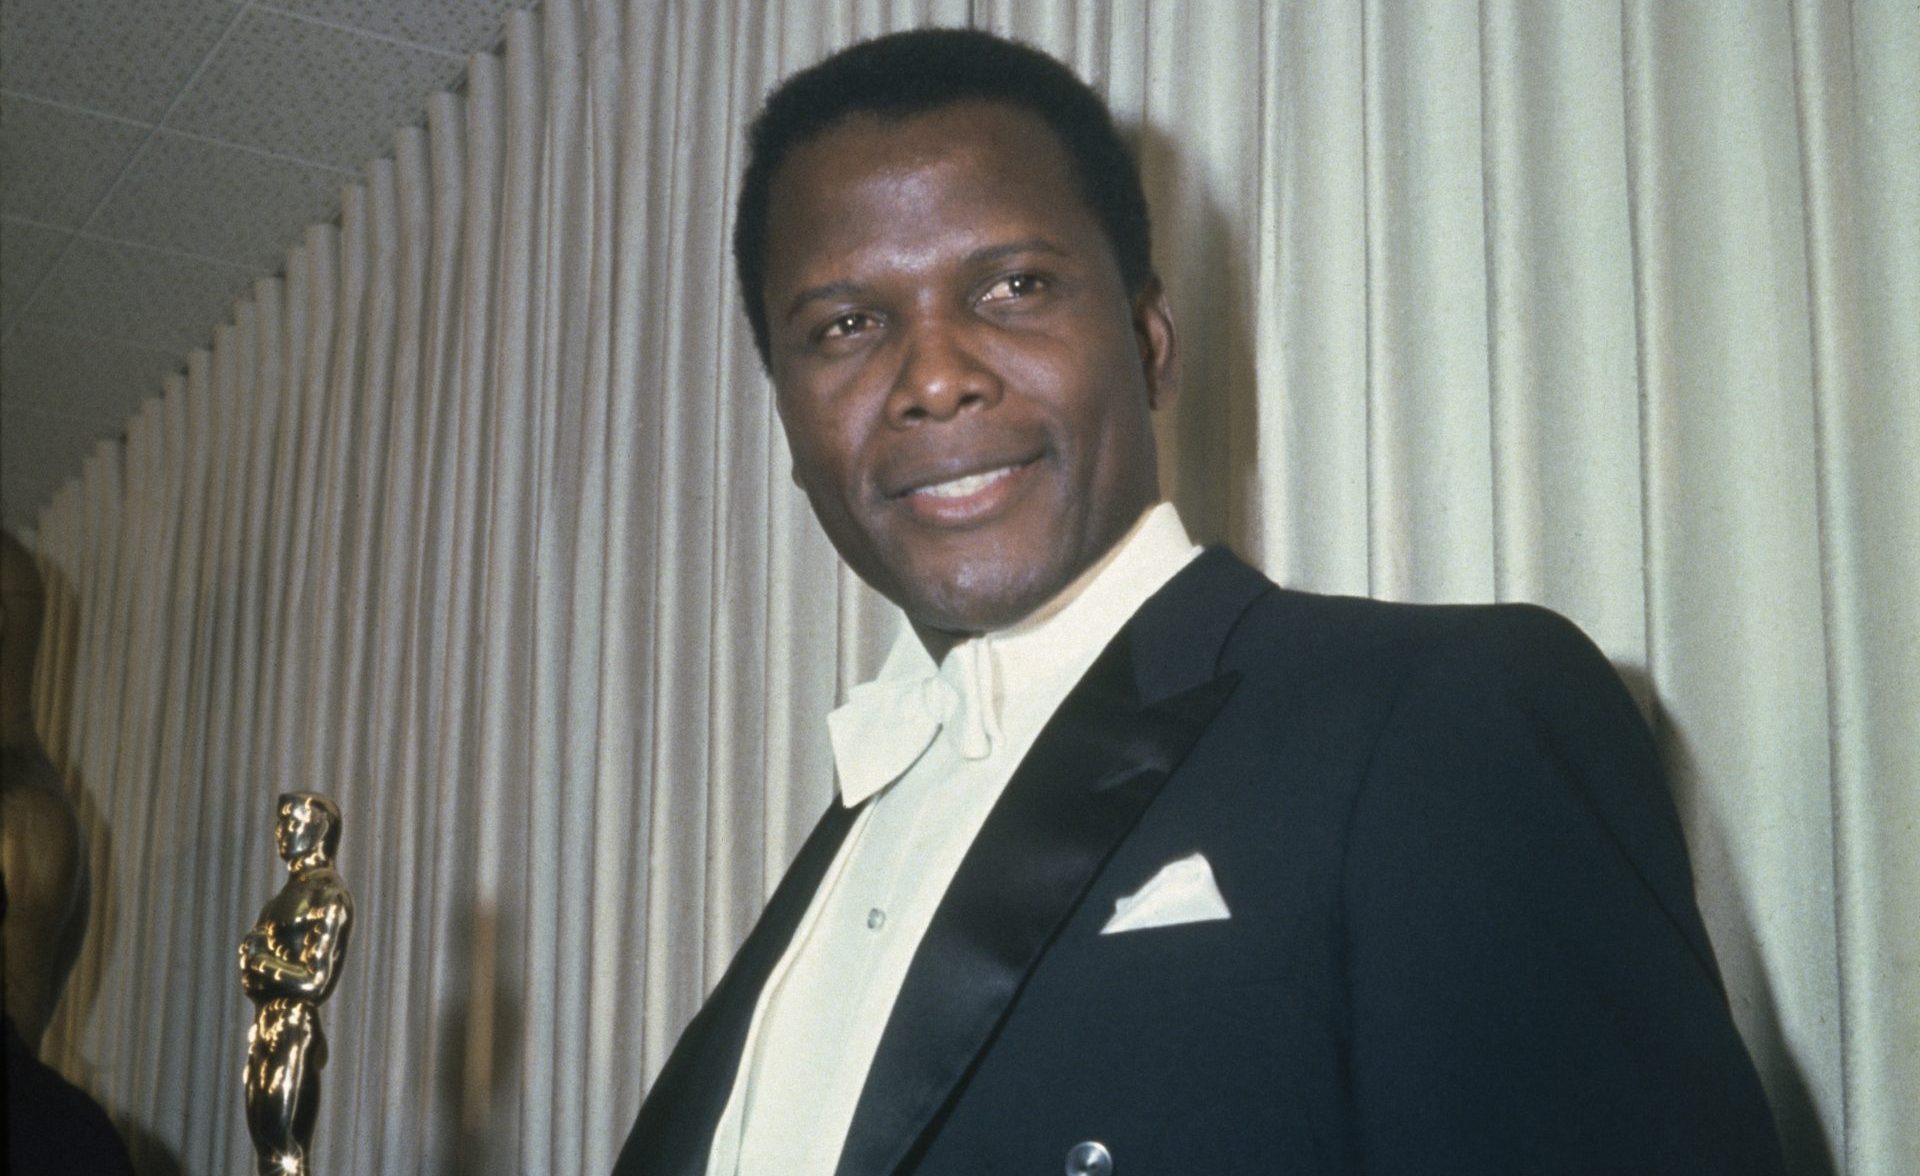 Trailer Drops For Upcoming Documentary About The Life And Career Of Sidney Poitier Produced By Oprah Winfrey